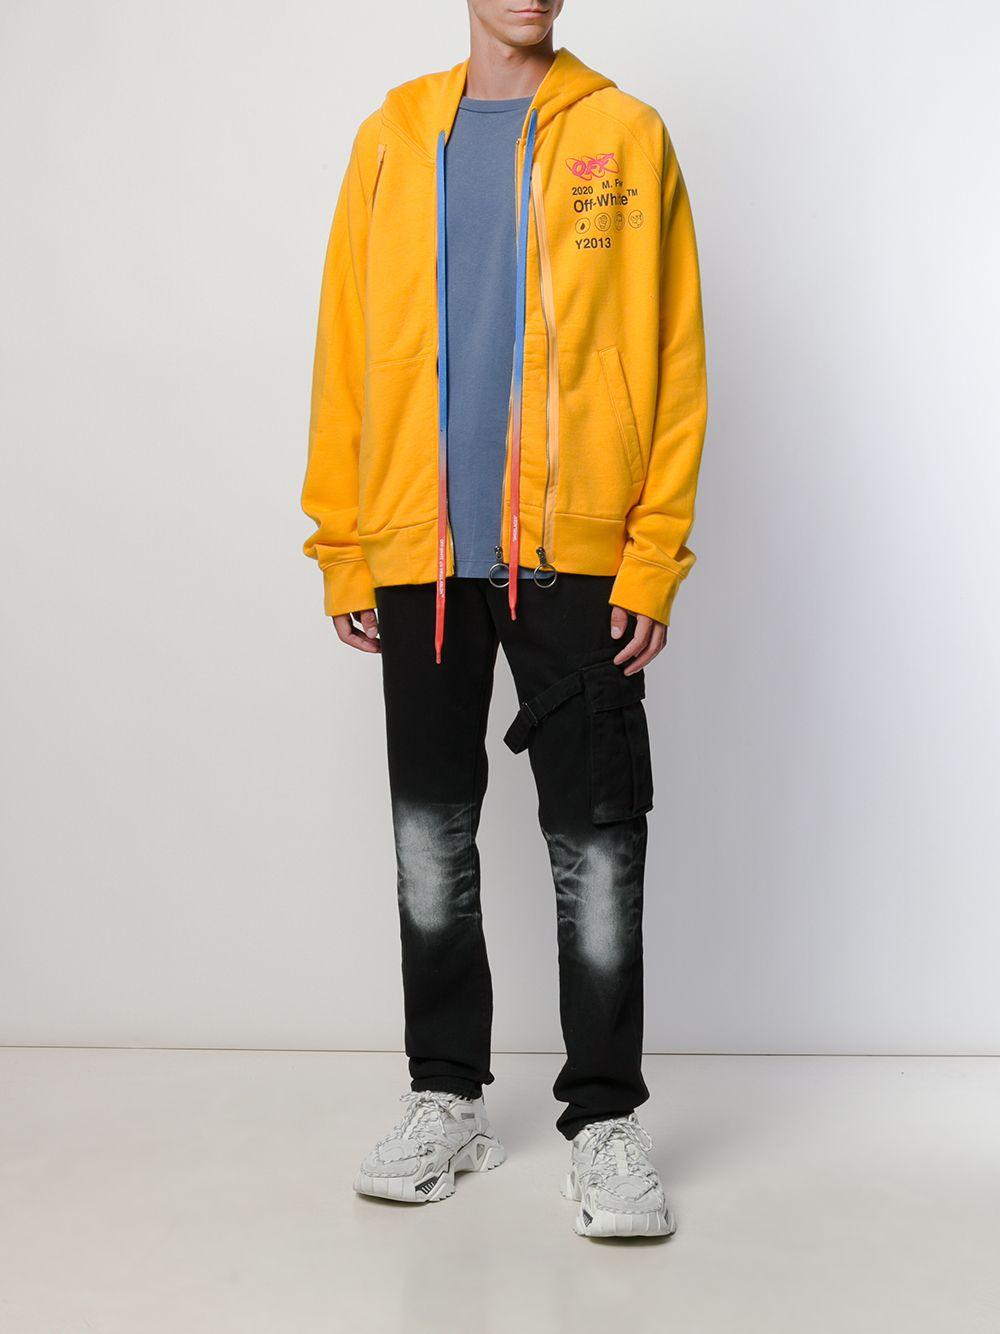 Off-White c/o Virgil Abloh Cotton Yellow Industrial Y2013 